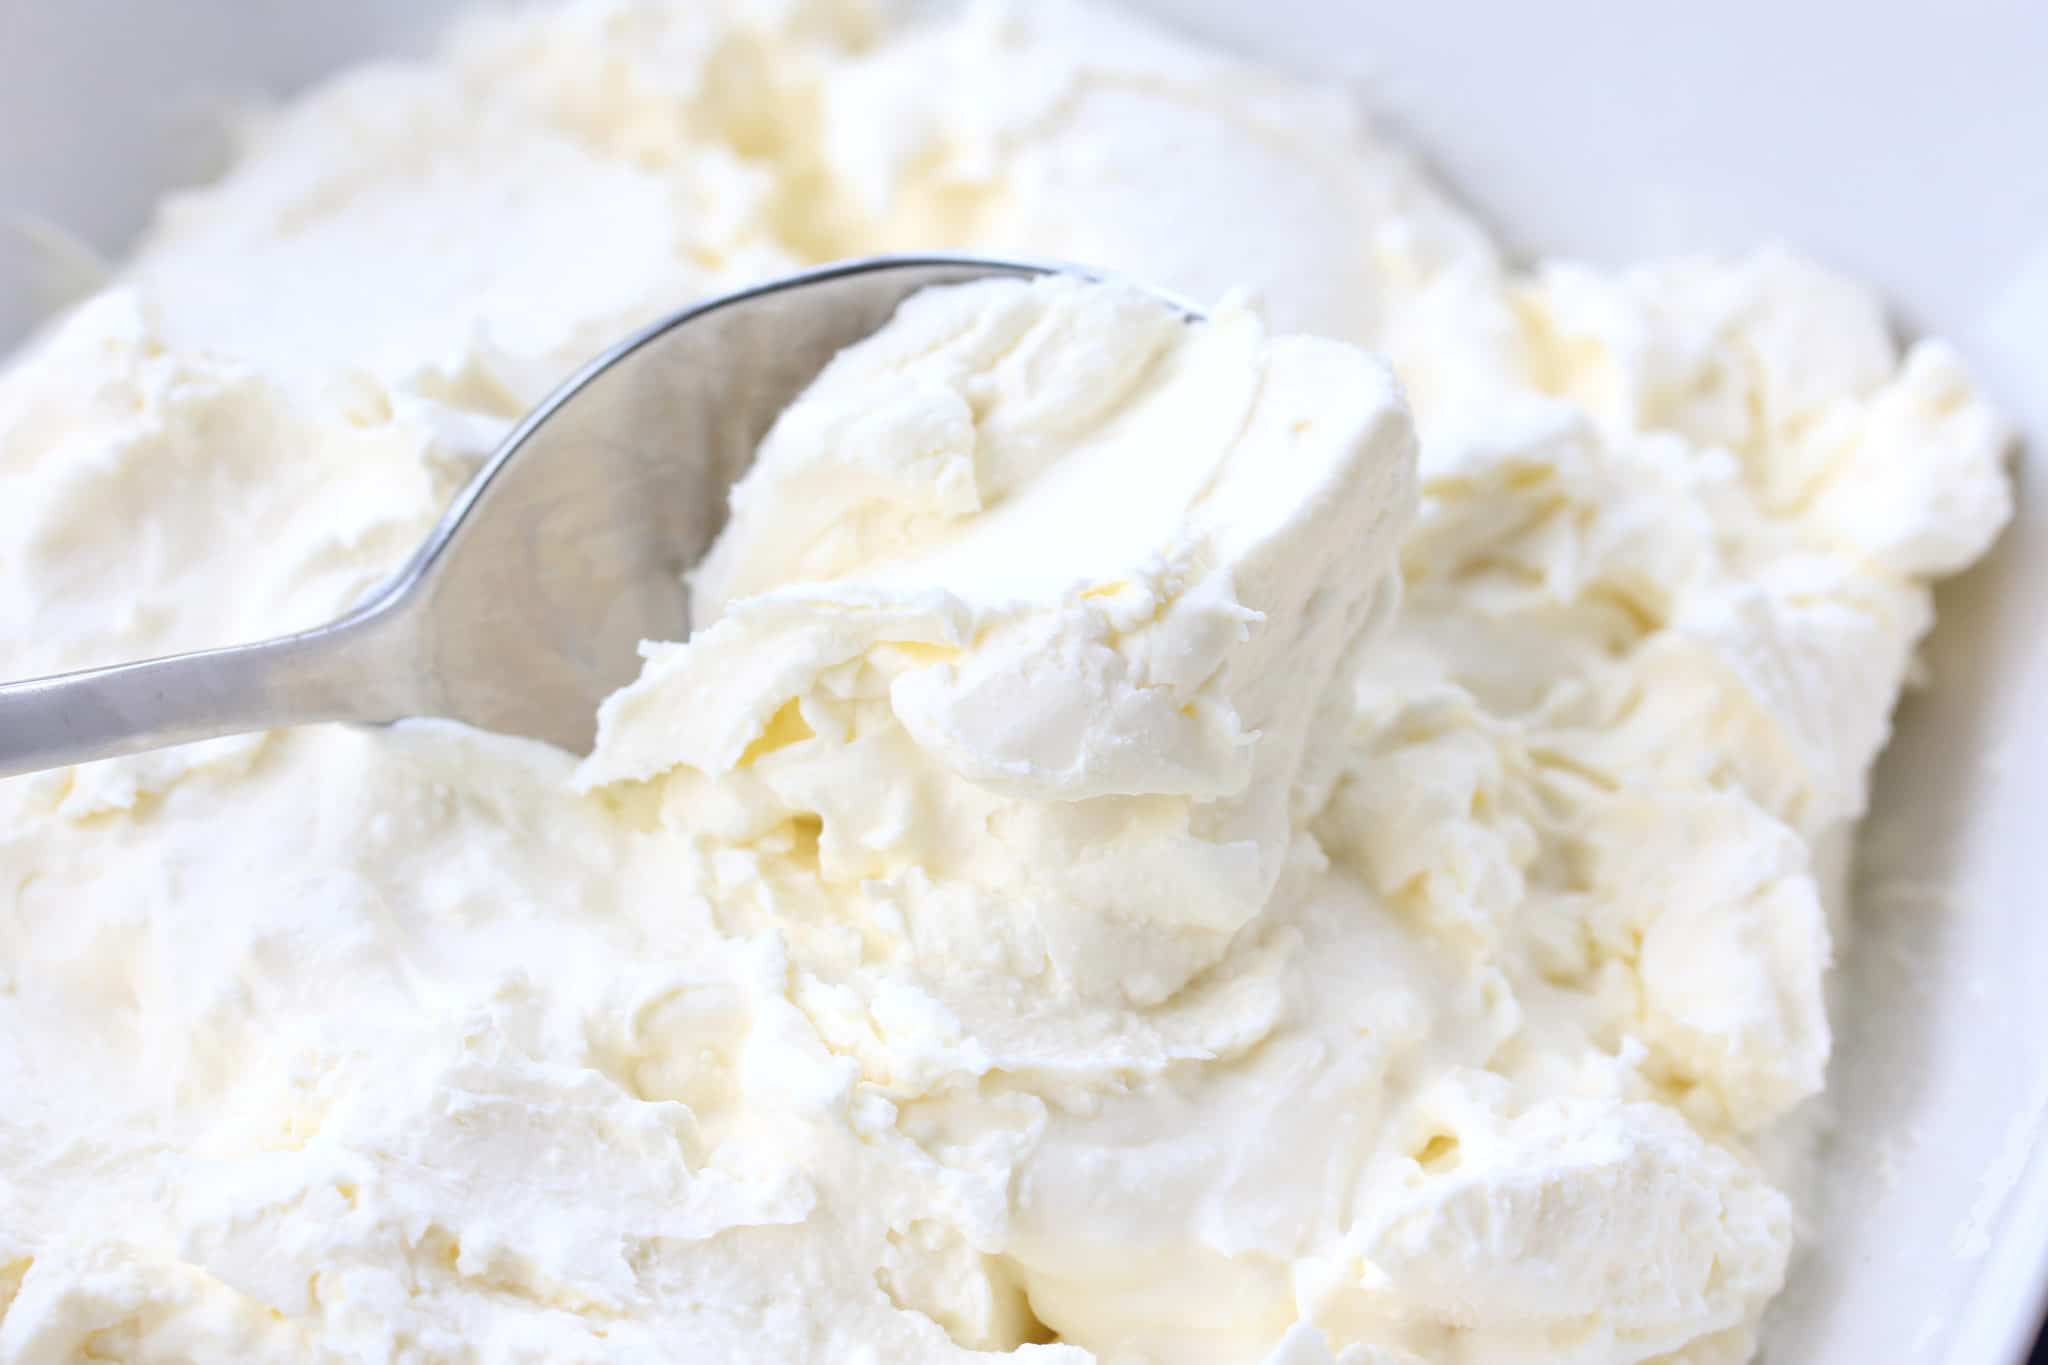 mascarpone recipe how to make homemade traditional authentic easy best foolproof